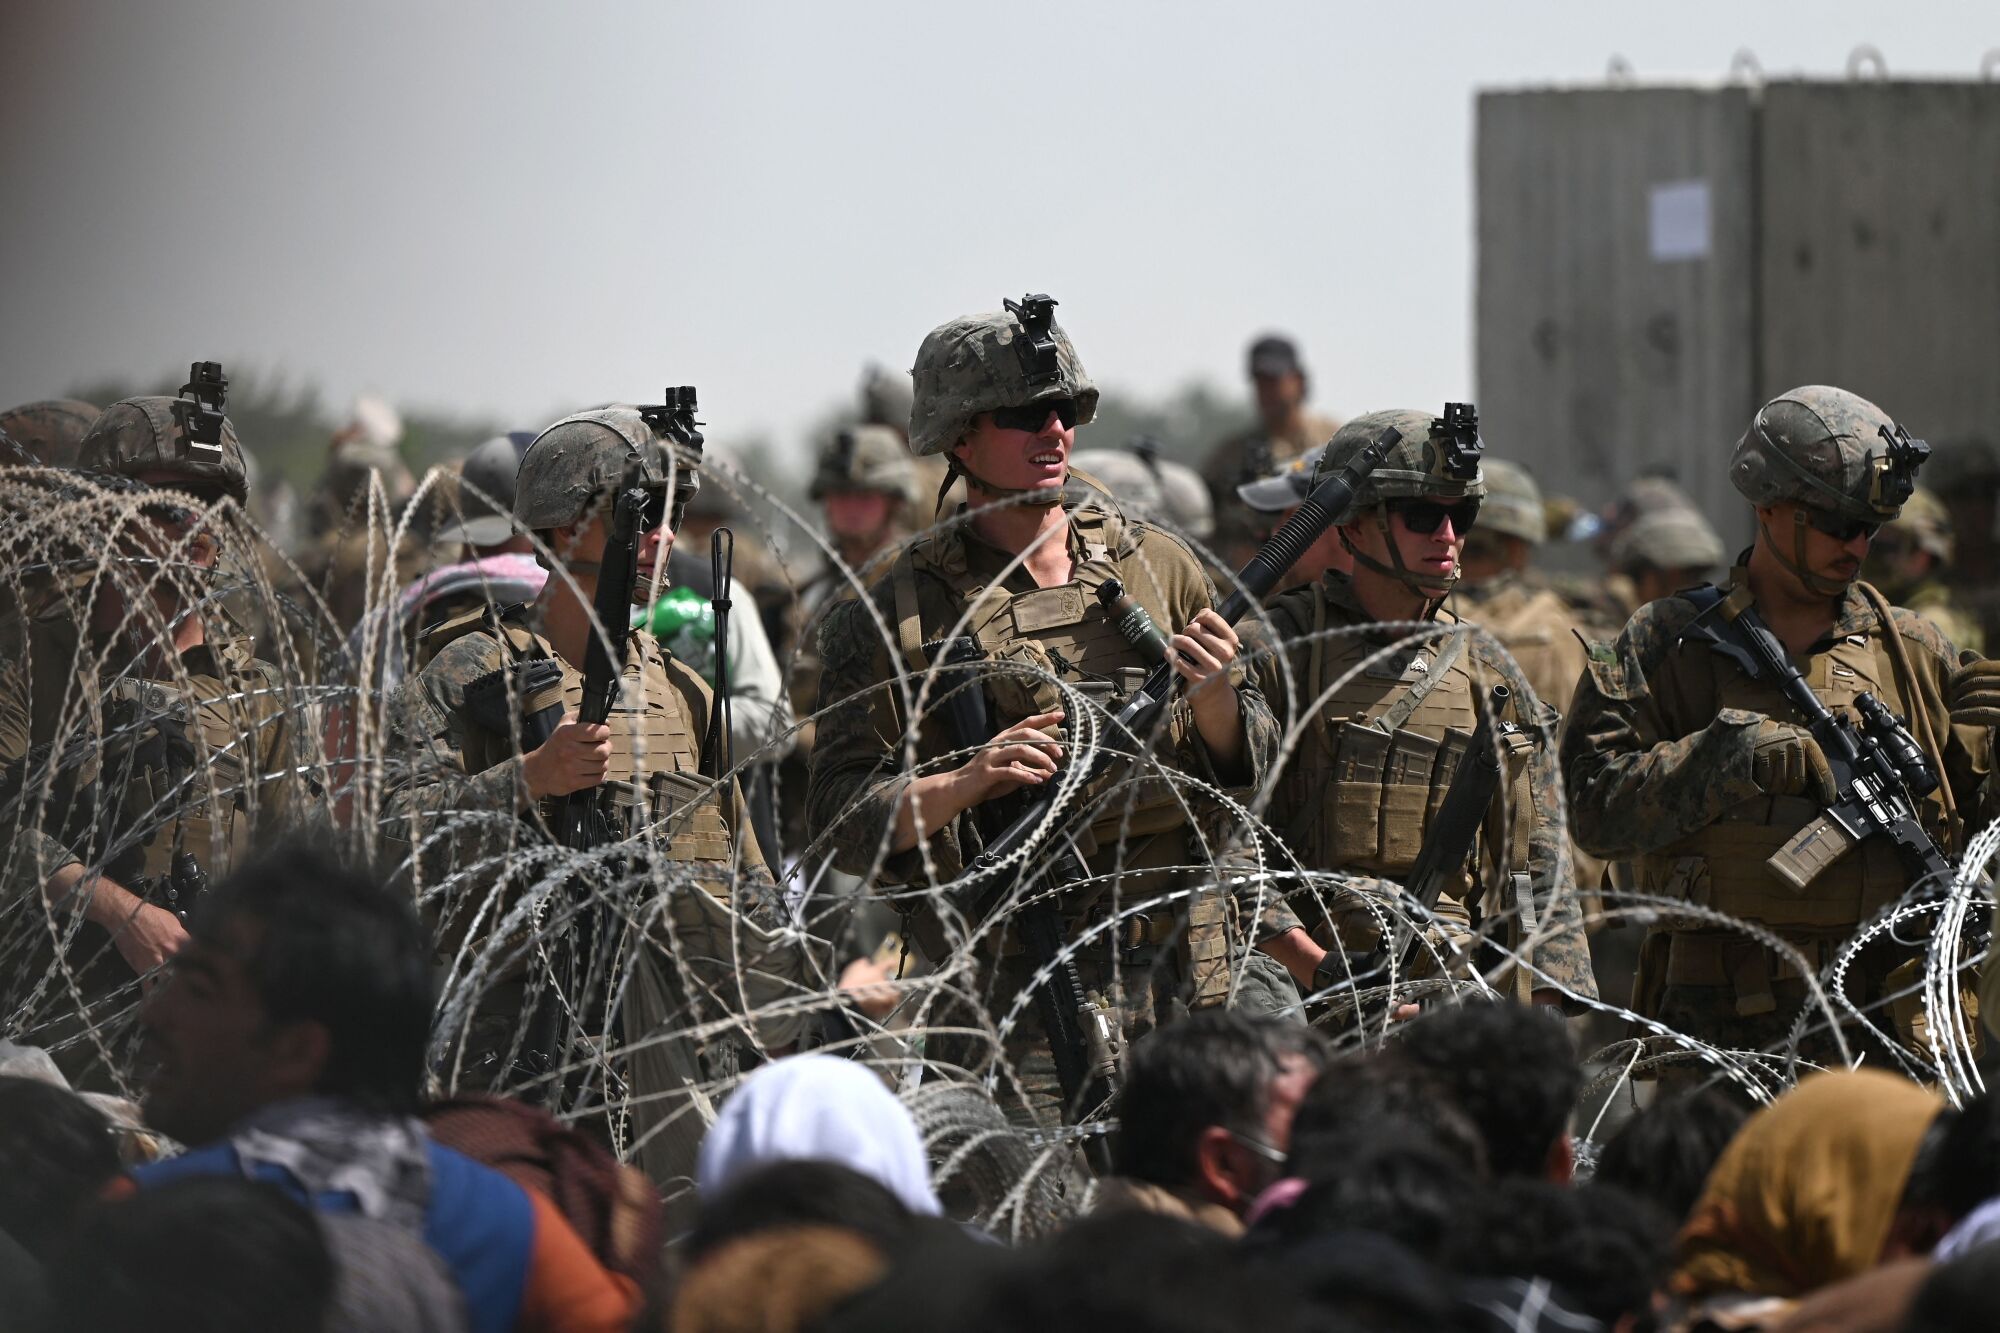 U.S. troops are seen behind barbed-wire fence across from a crowd of Afghans